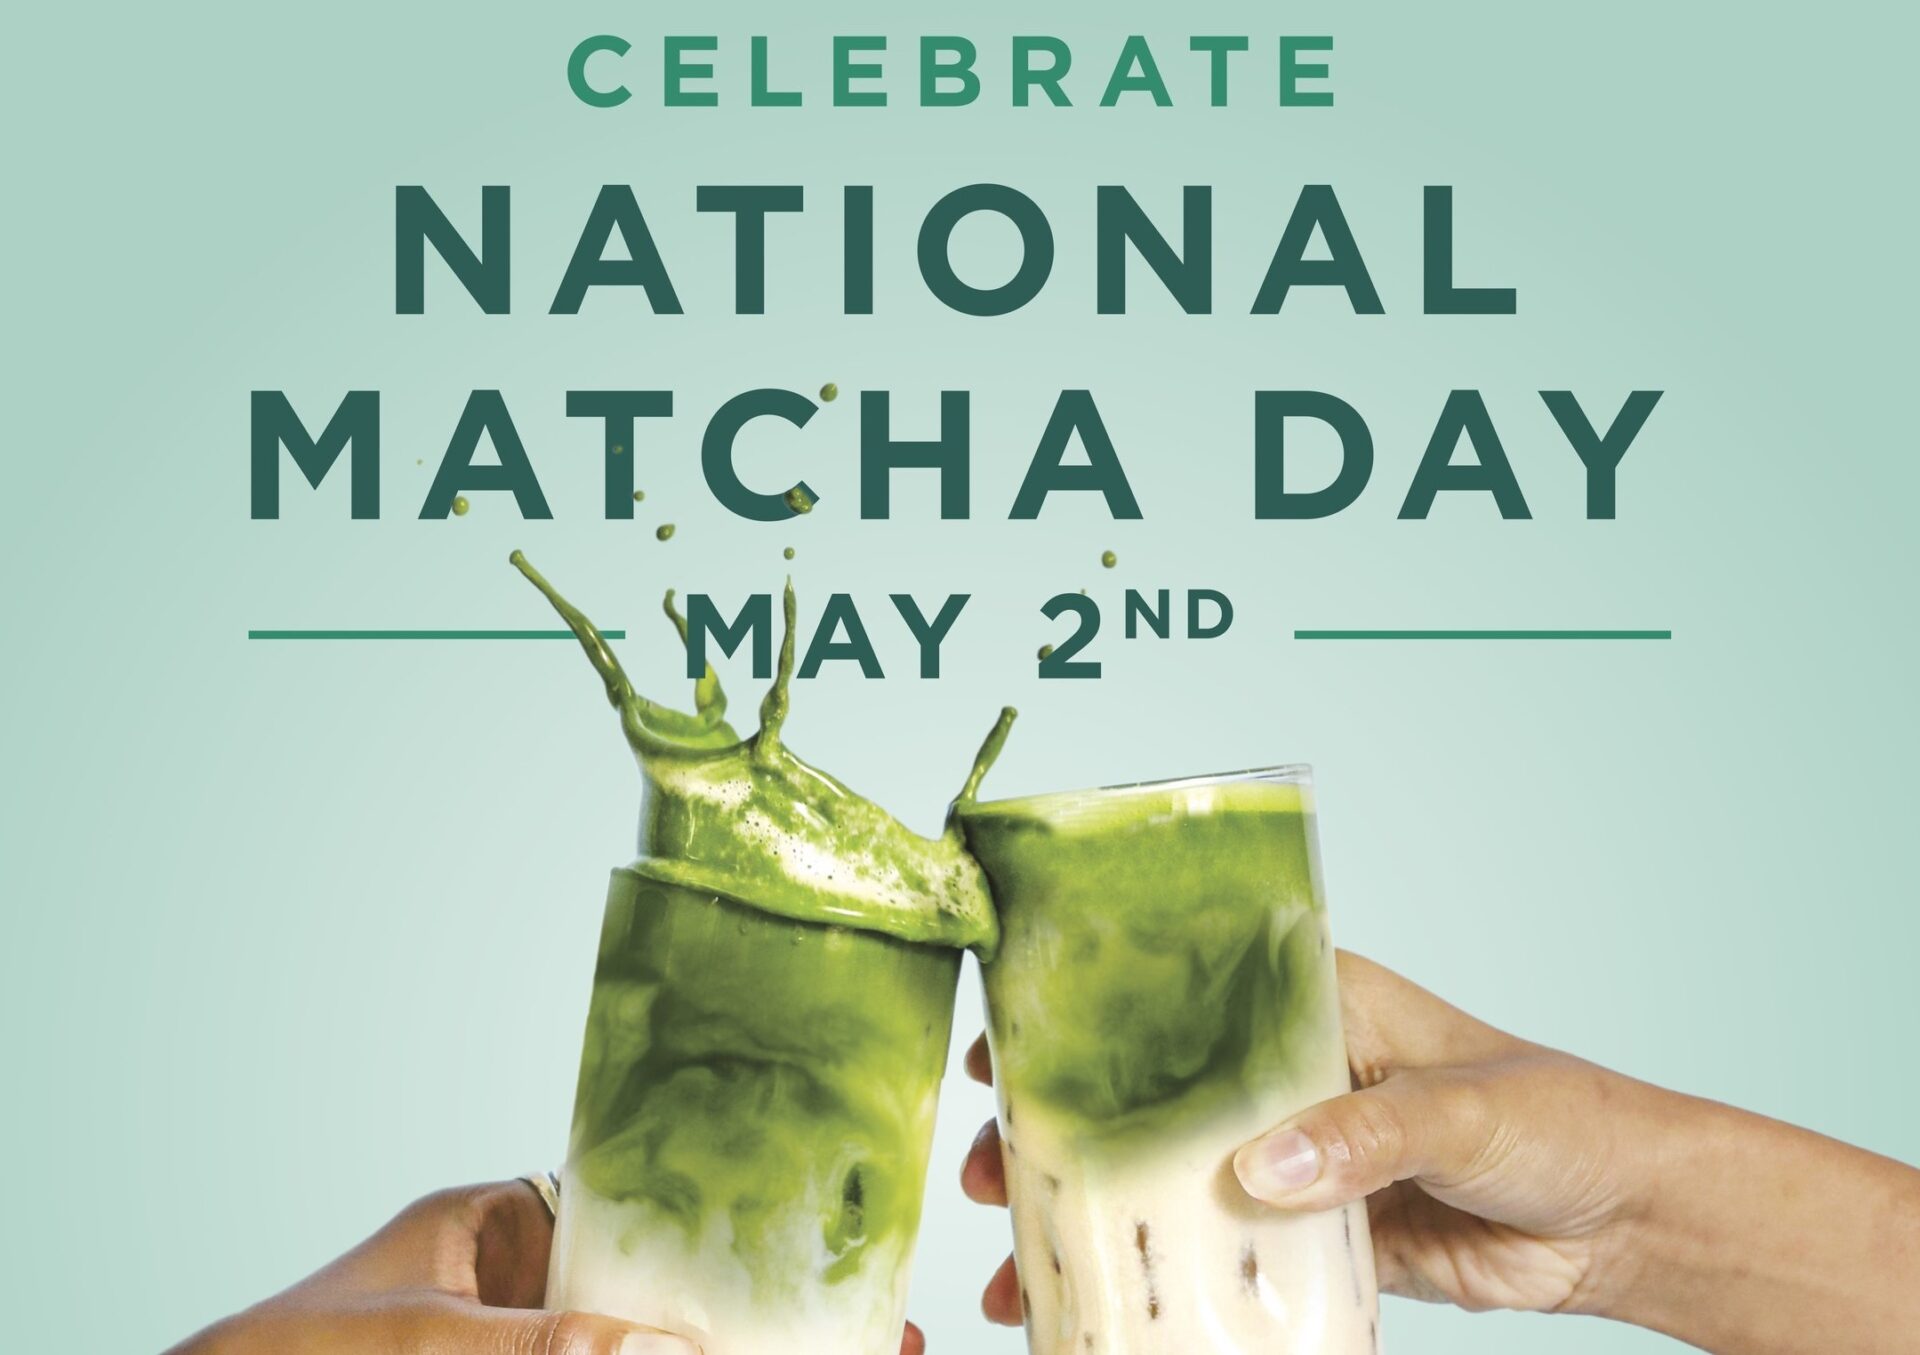 Jade Leaf celebrates second Annual National Matcha Day on May 2nd